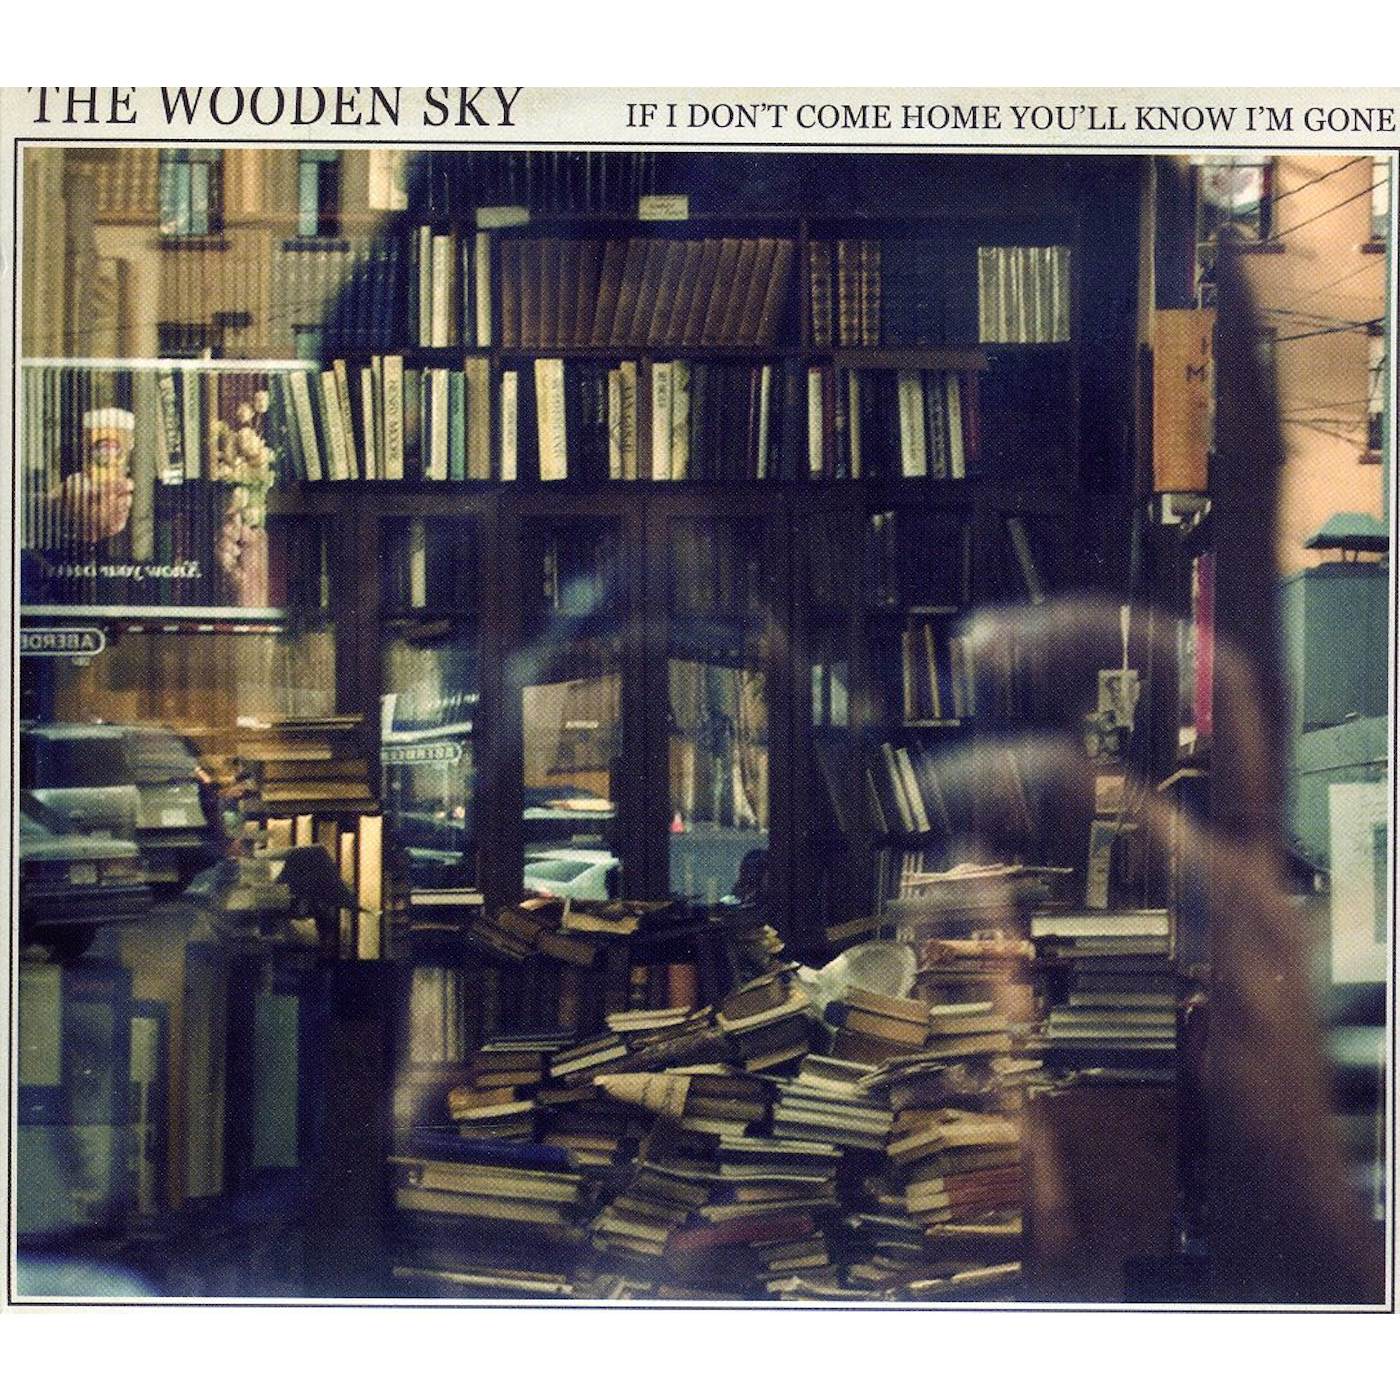 The Wooden Sky IF I DON'T COME HOME YOULL KNOW CD